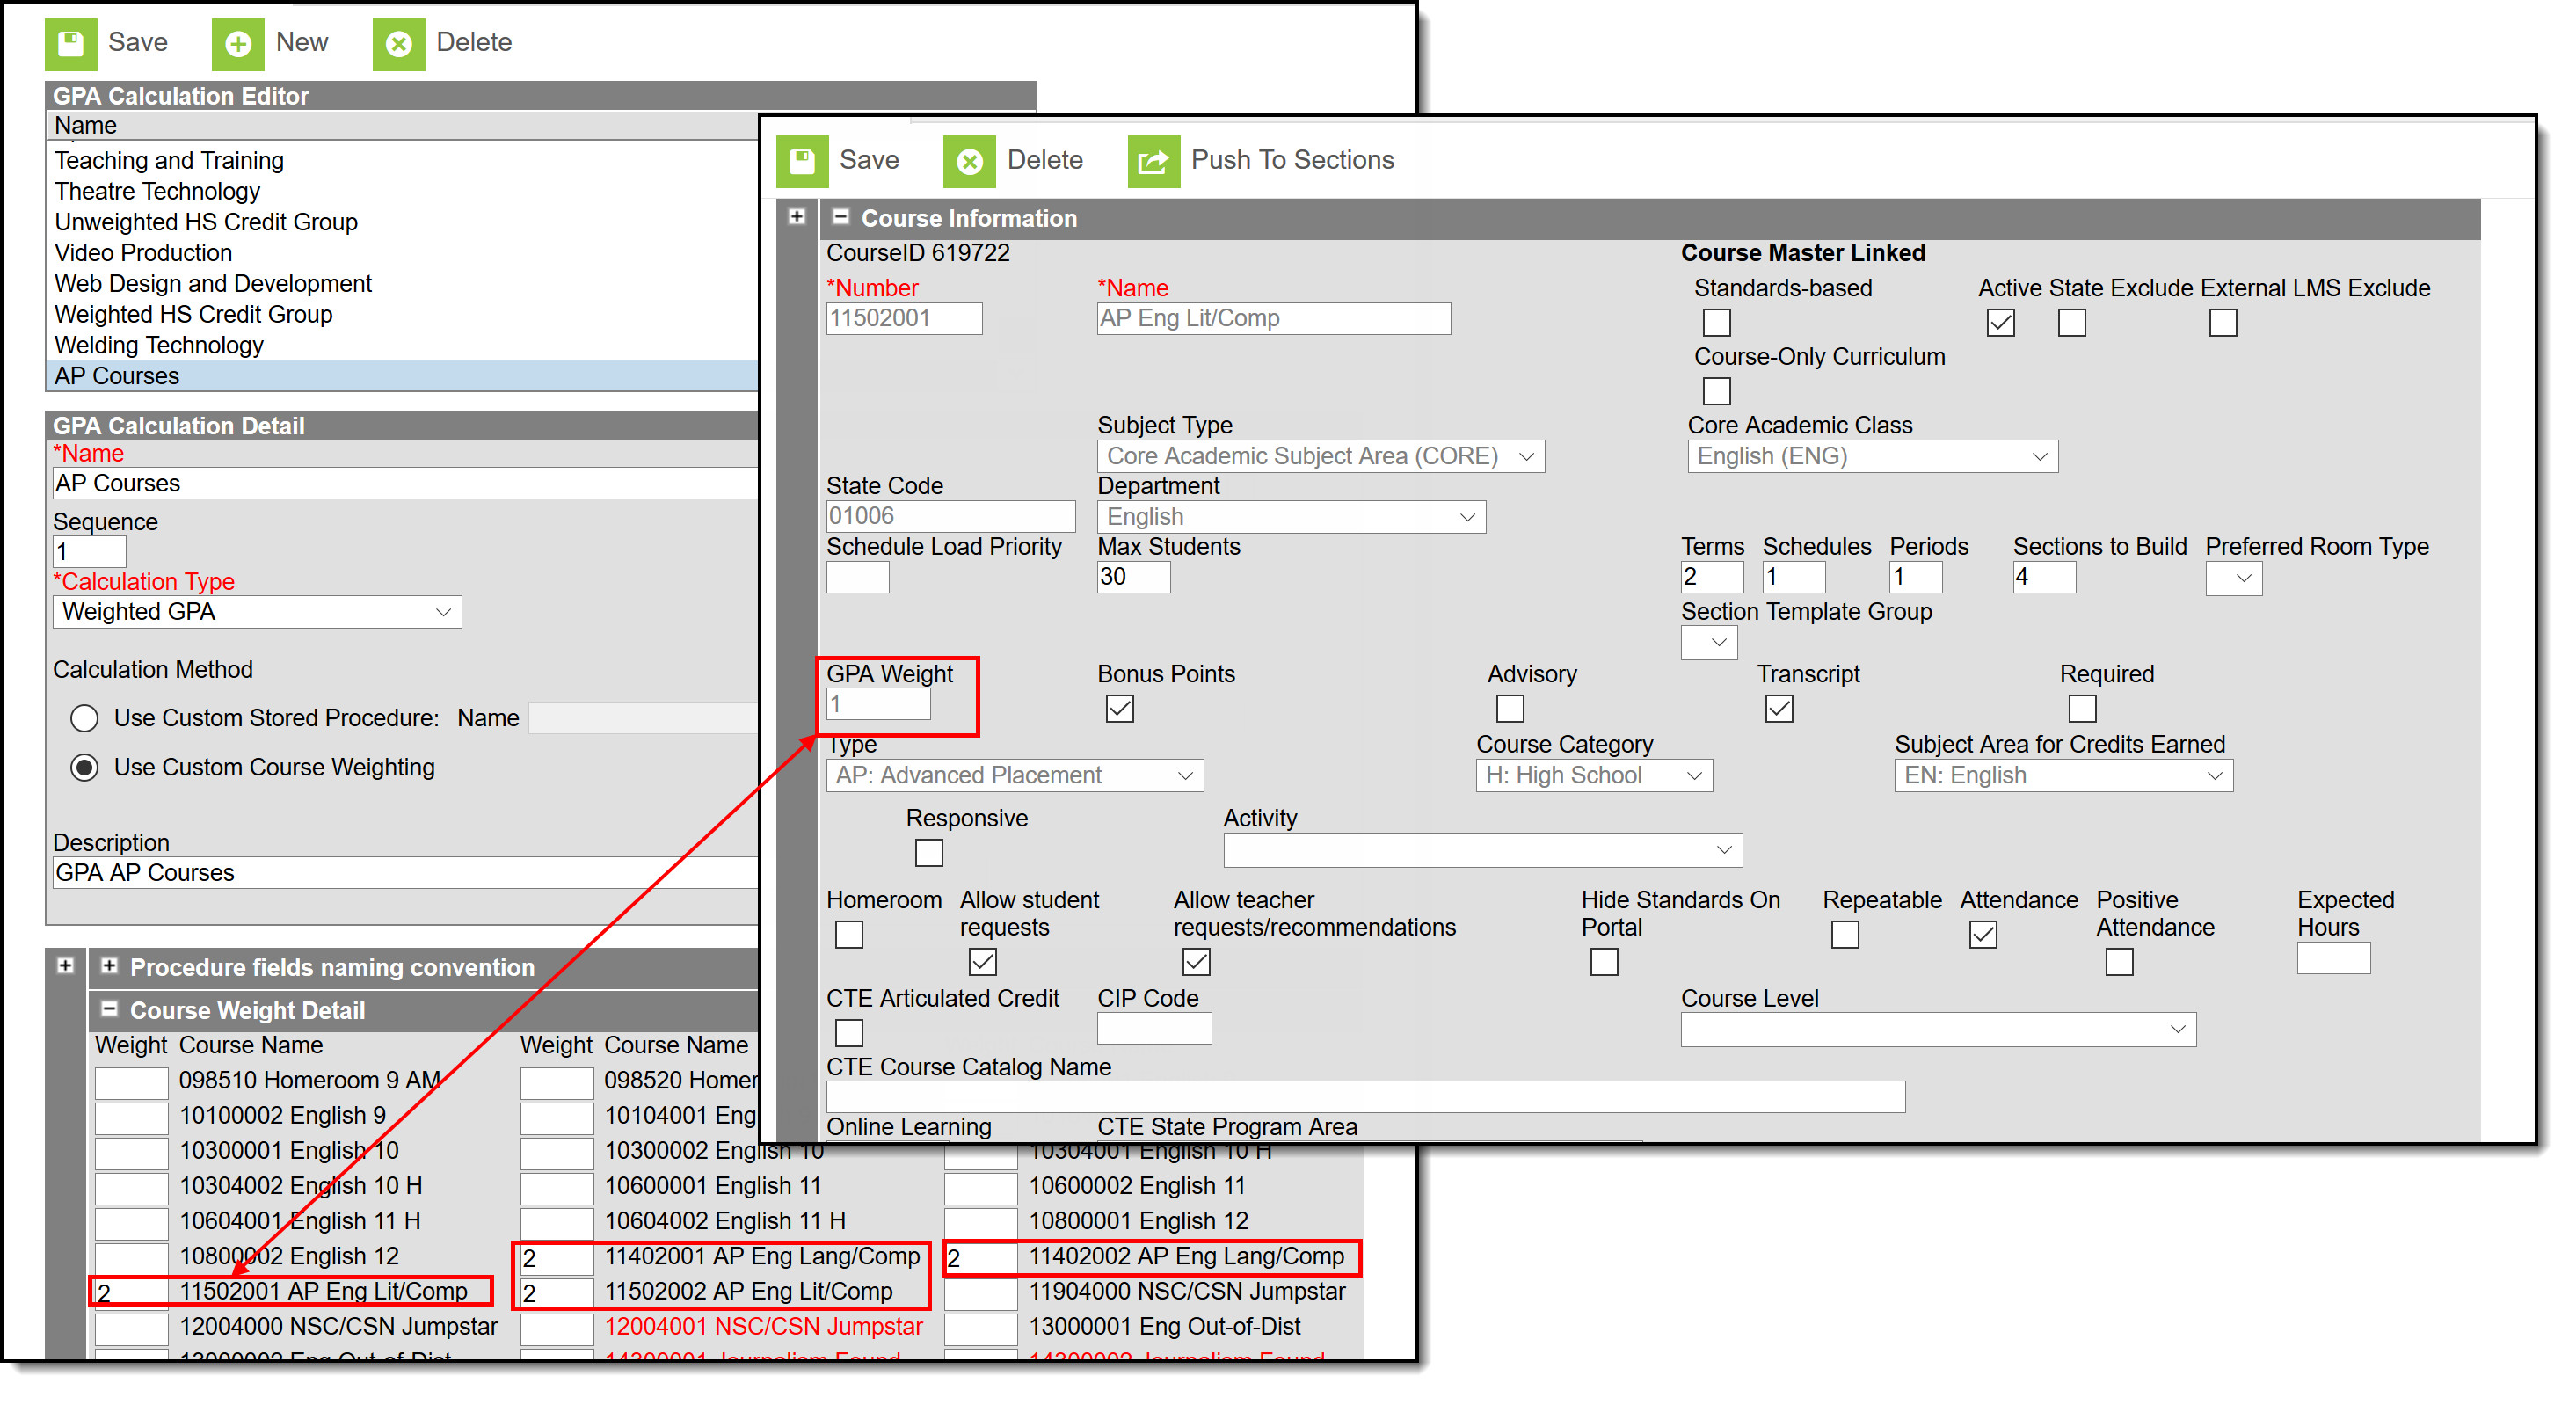 Screenshot of a custom GPA detail editor with weight for GPA on course and GPA Calculation details highlighted.